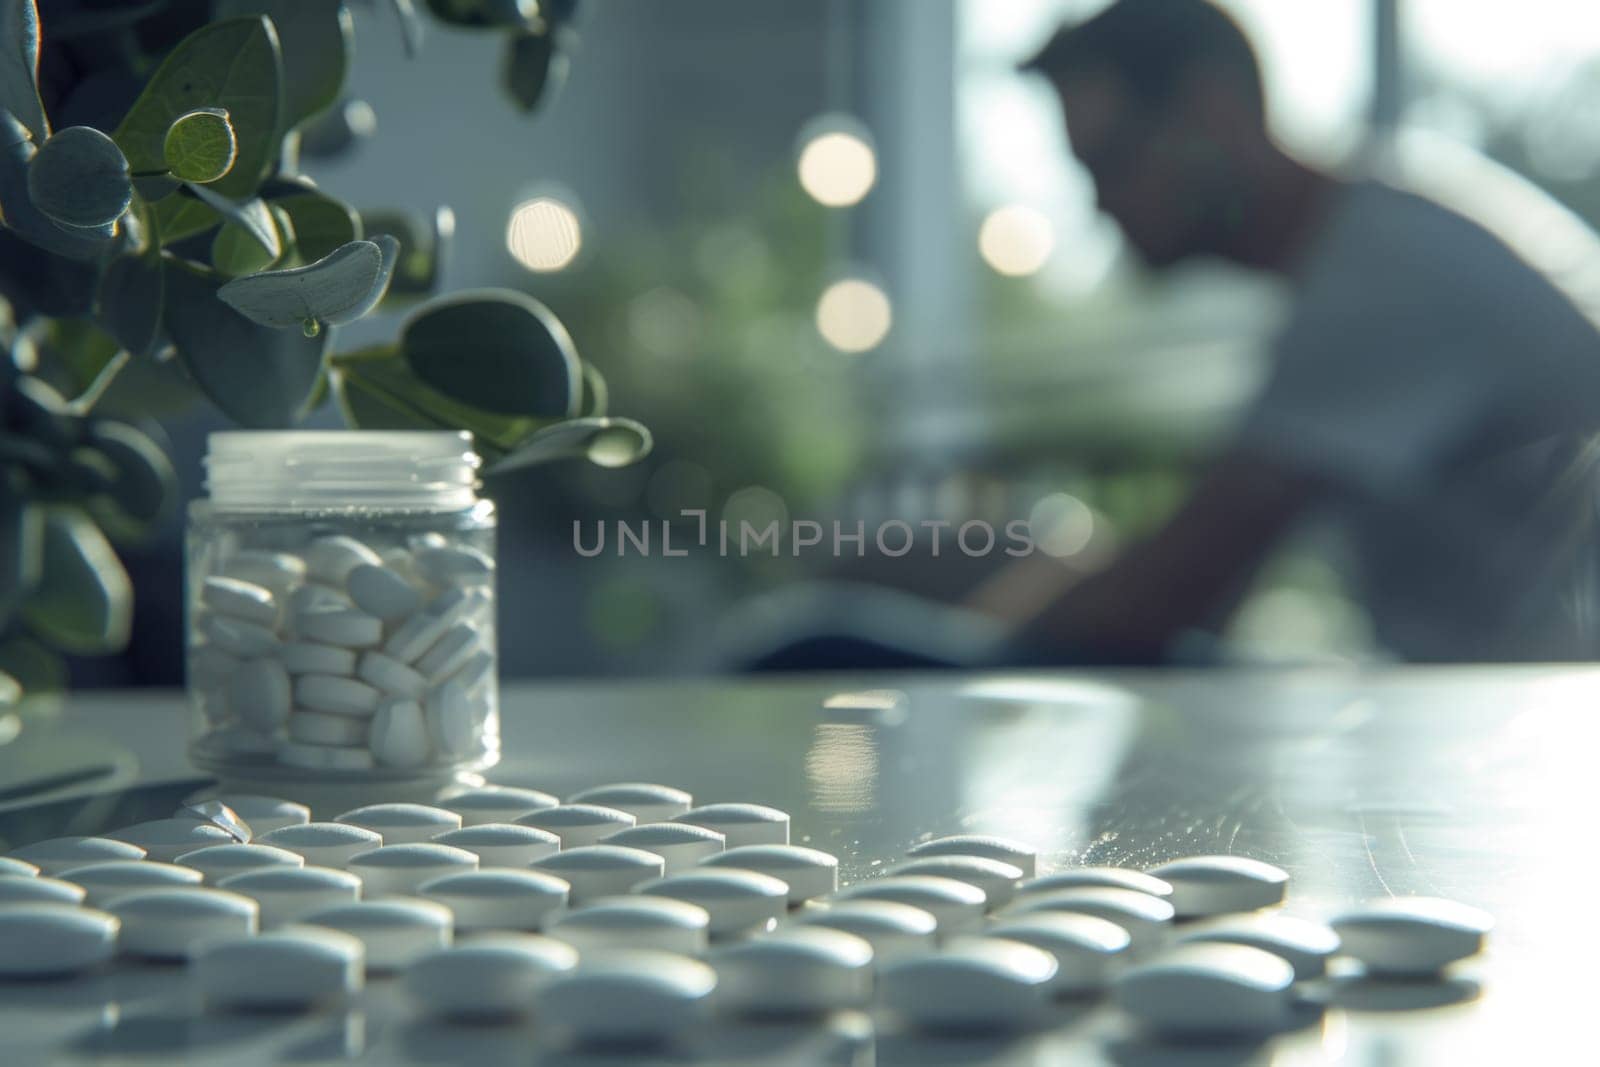 A close-up shot of a glass jar filled with various pills placed on top of a wooden table.